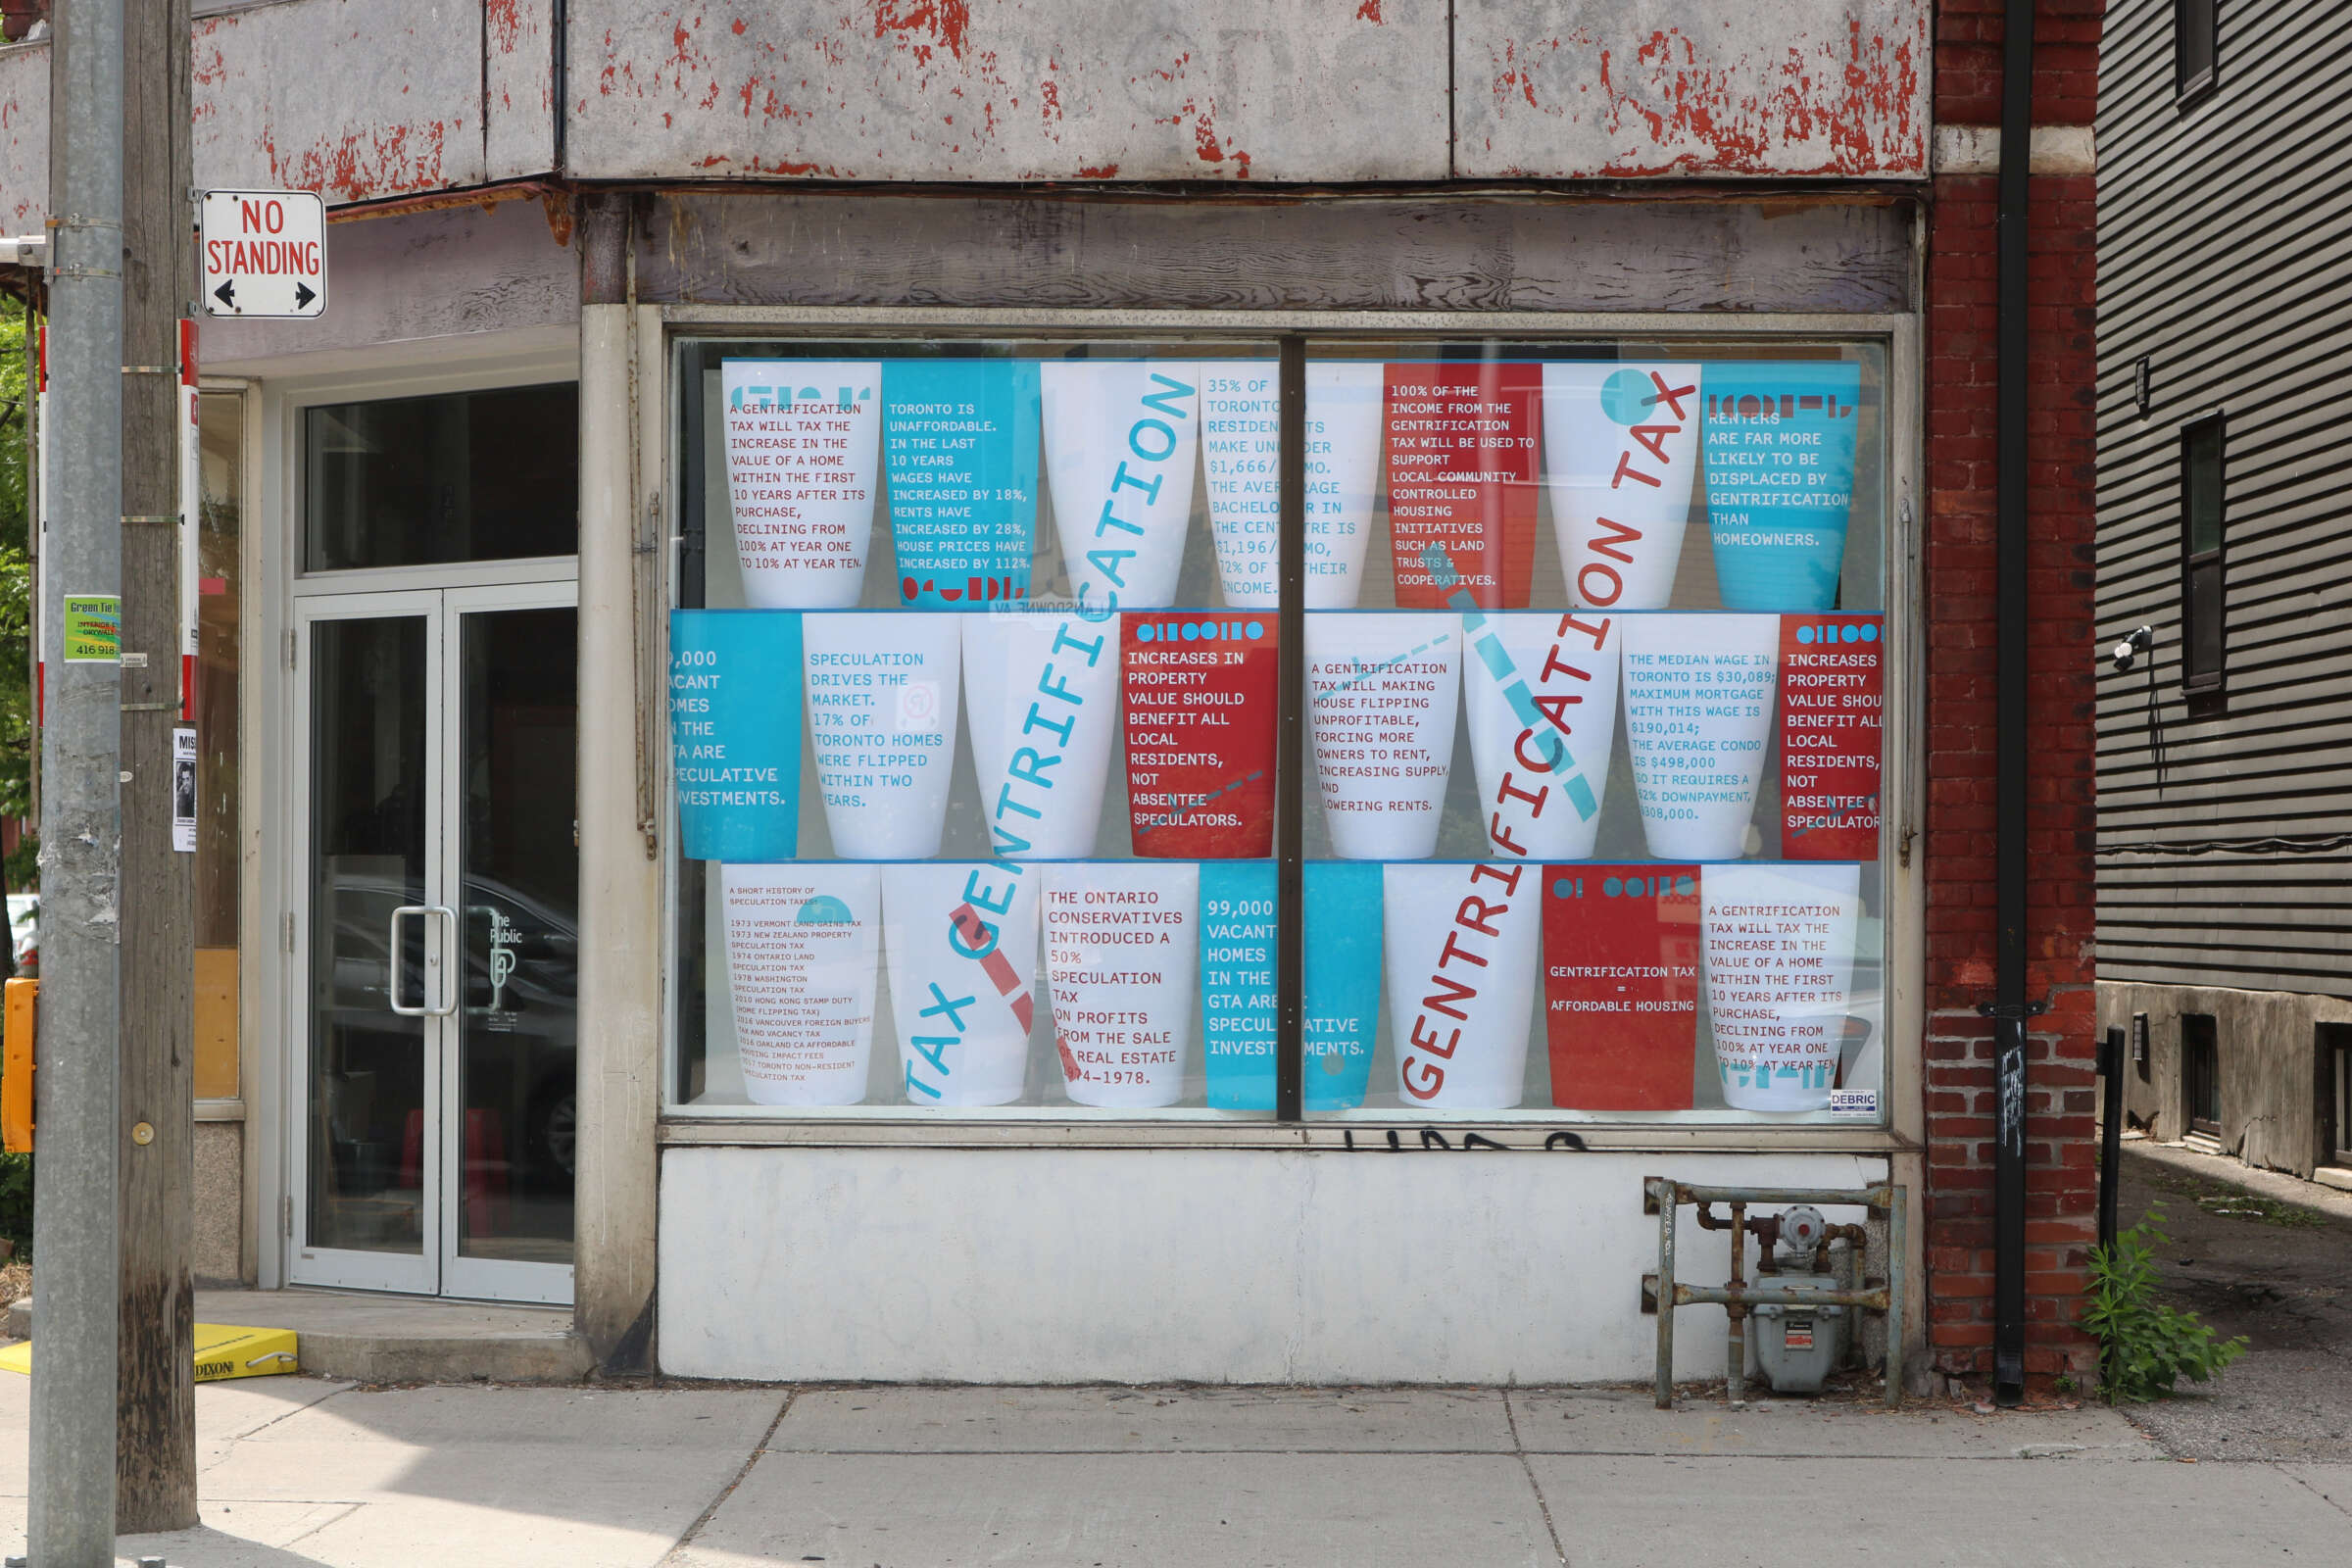 A storefront with a large window covered in colorful posters. The posters have text discussing issues like "gentrification" and "tax incentives." The exterior building is weathered with peeling paint. A "No Standing" sign is mounted on a nearby pole.